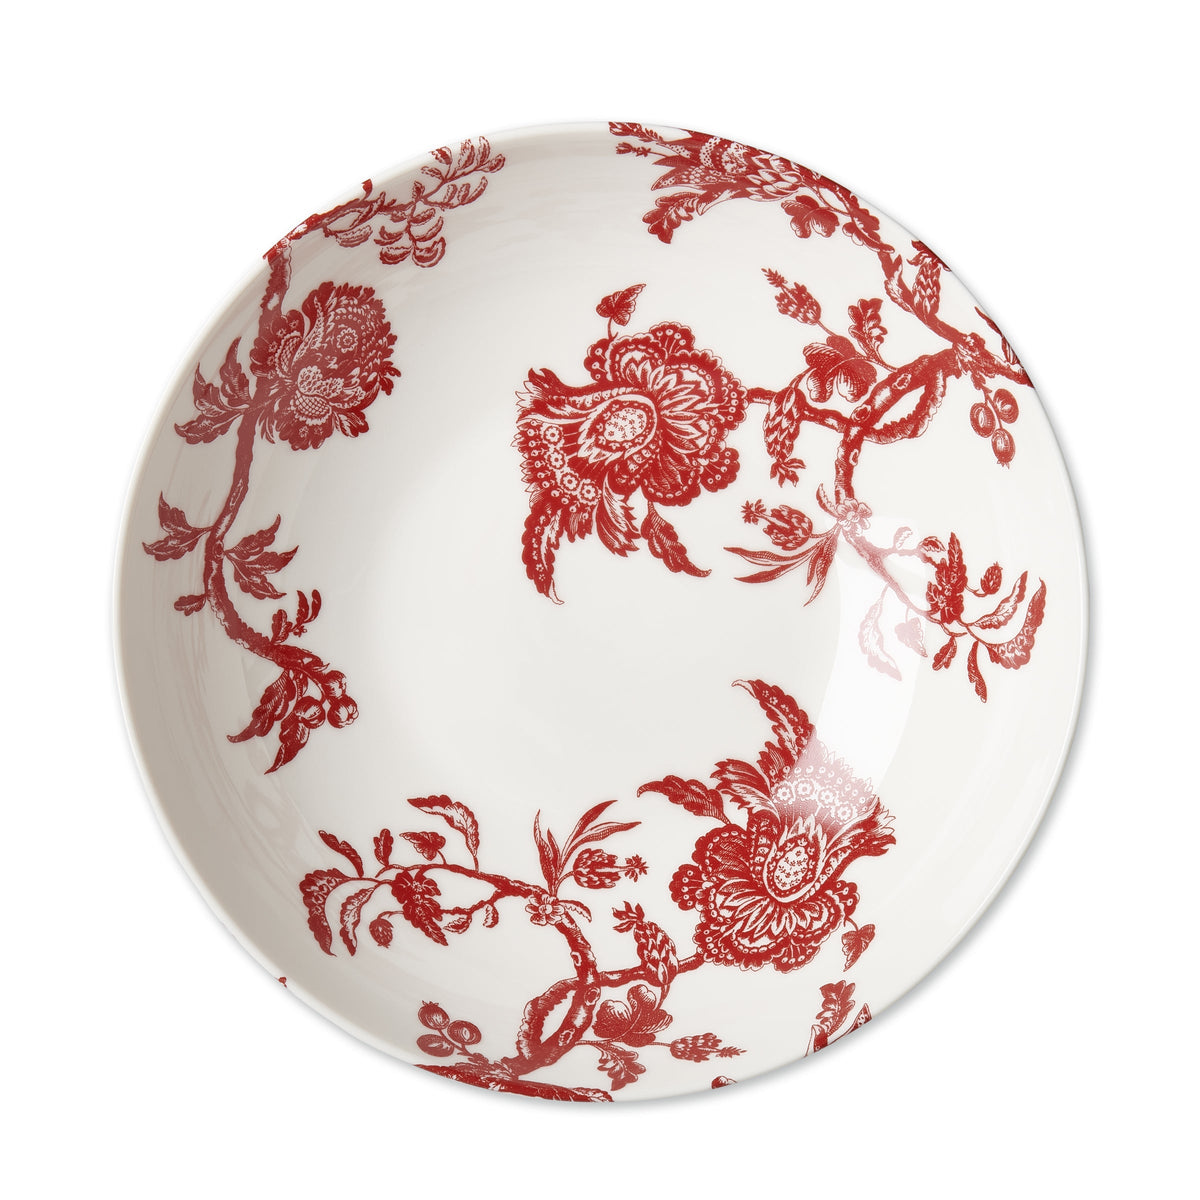 Top view of the Arcadia Crimson Red Wide Serving Bowl from Caskata.